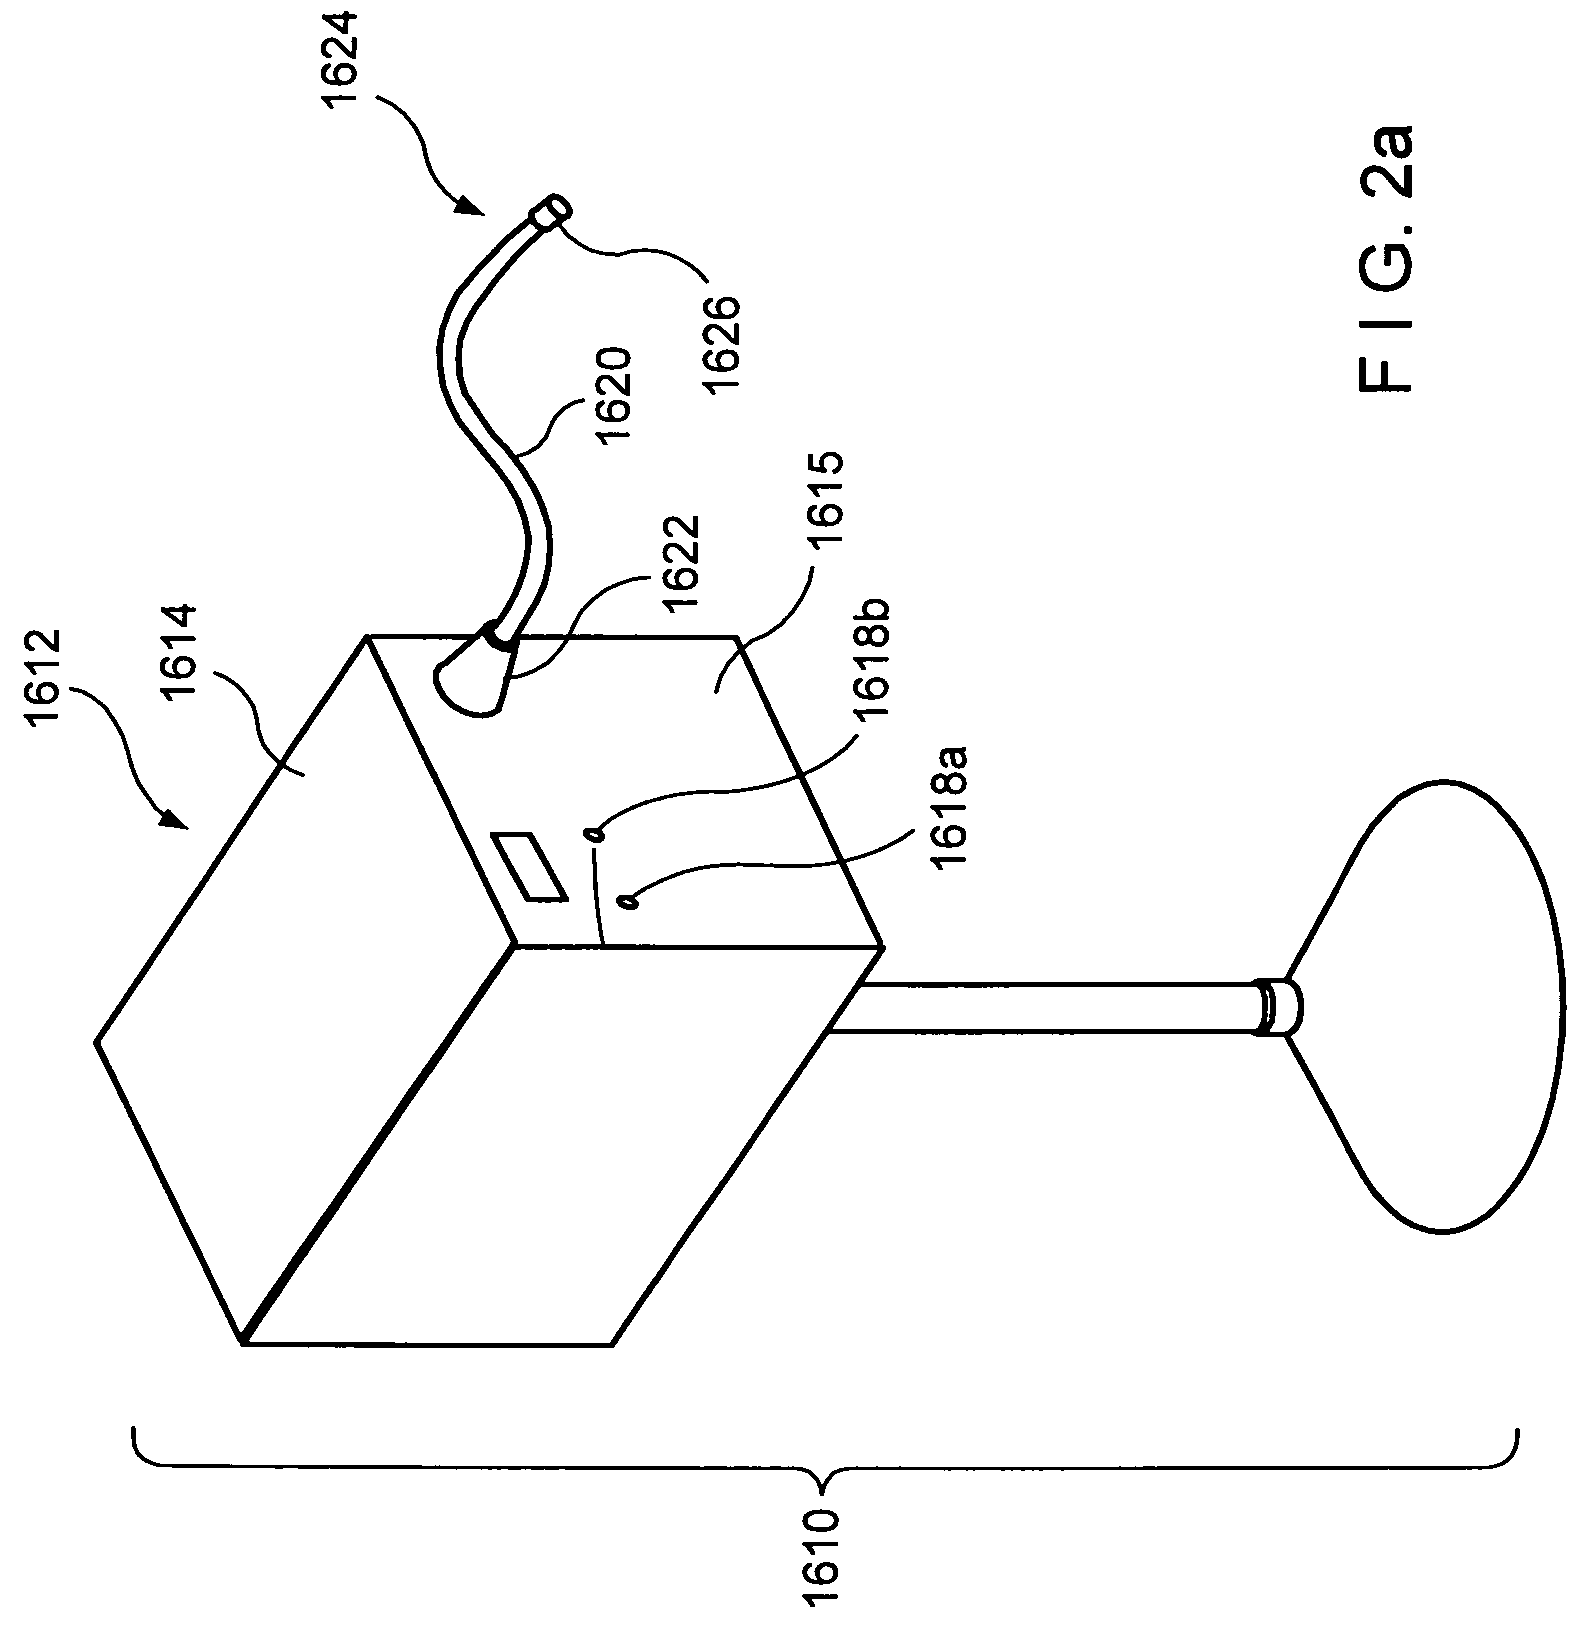 Surgical device having a rotatable jaw portion